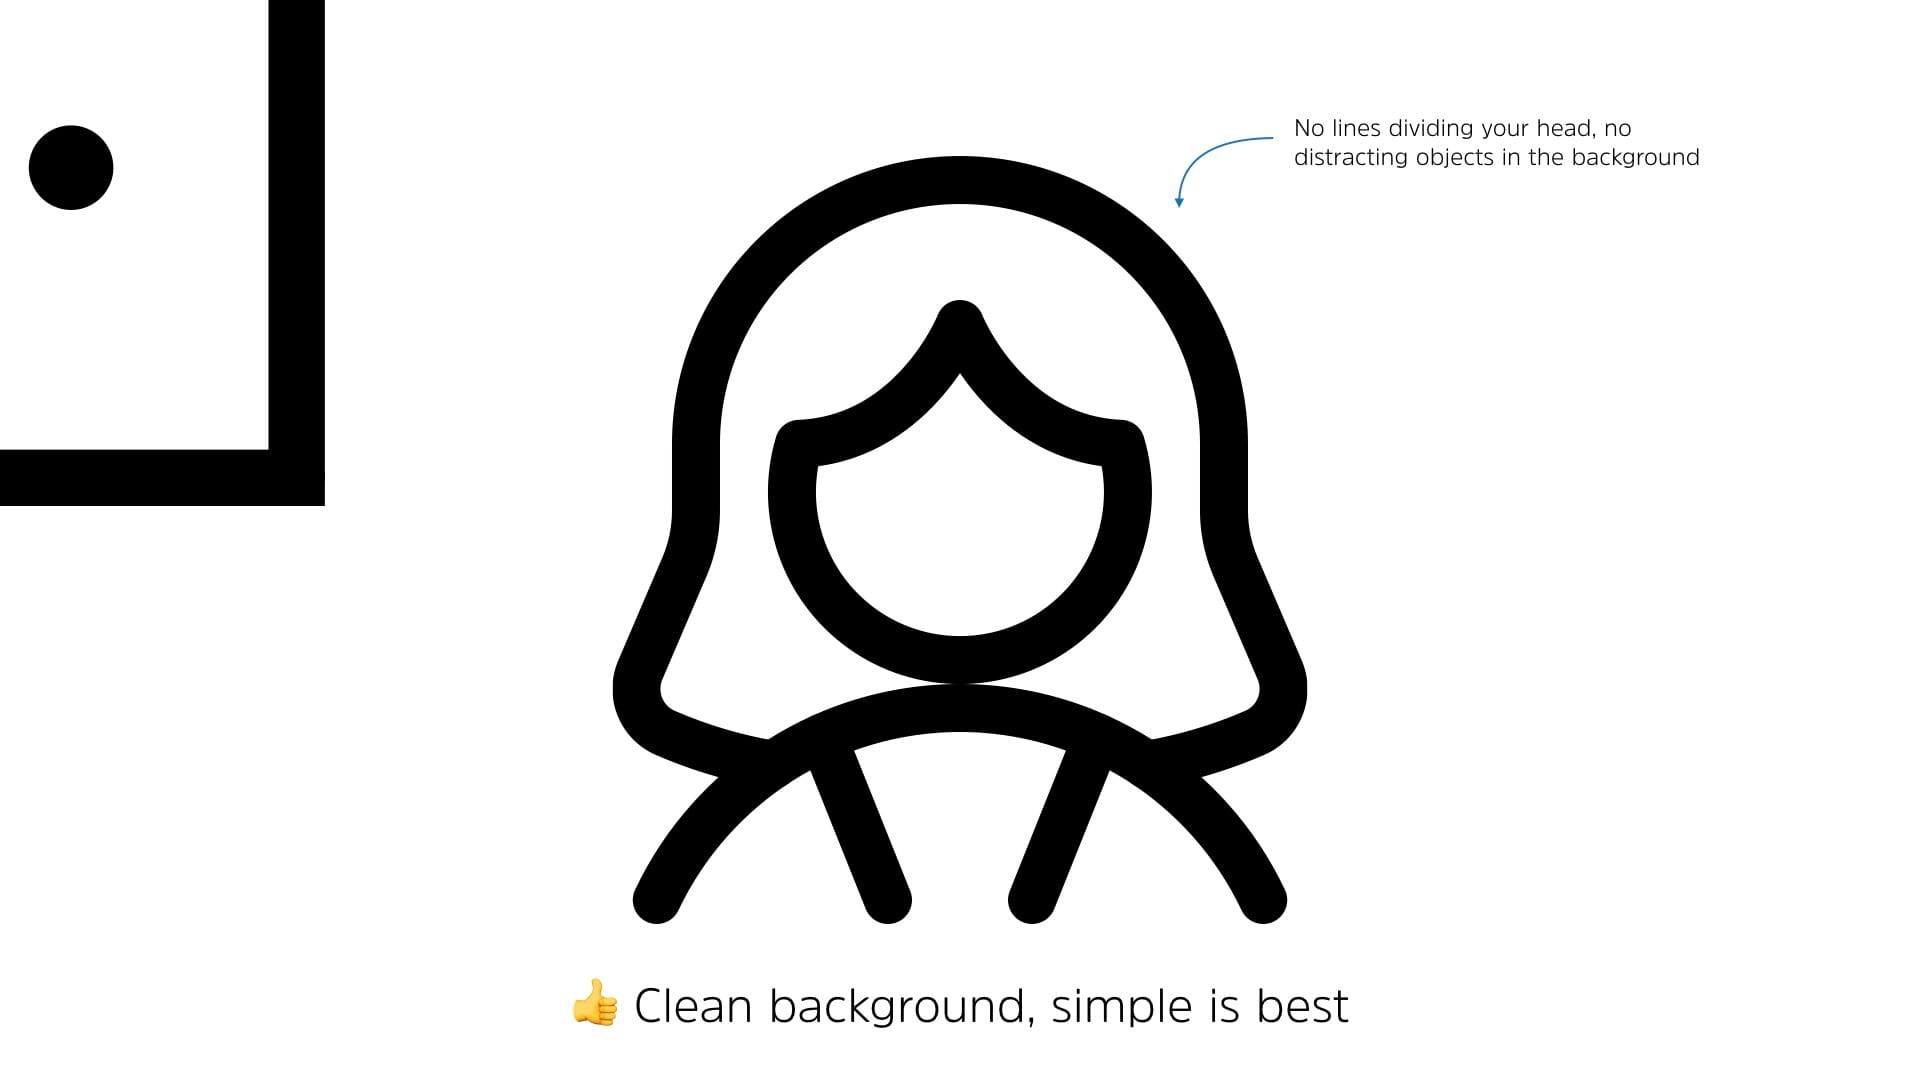 Taking a few minutes to ensure that your background is clean and simple is key to success